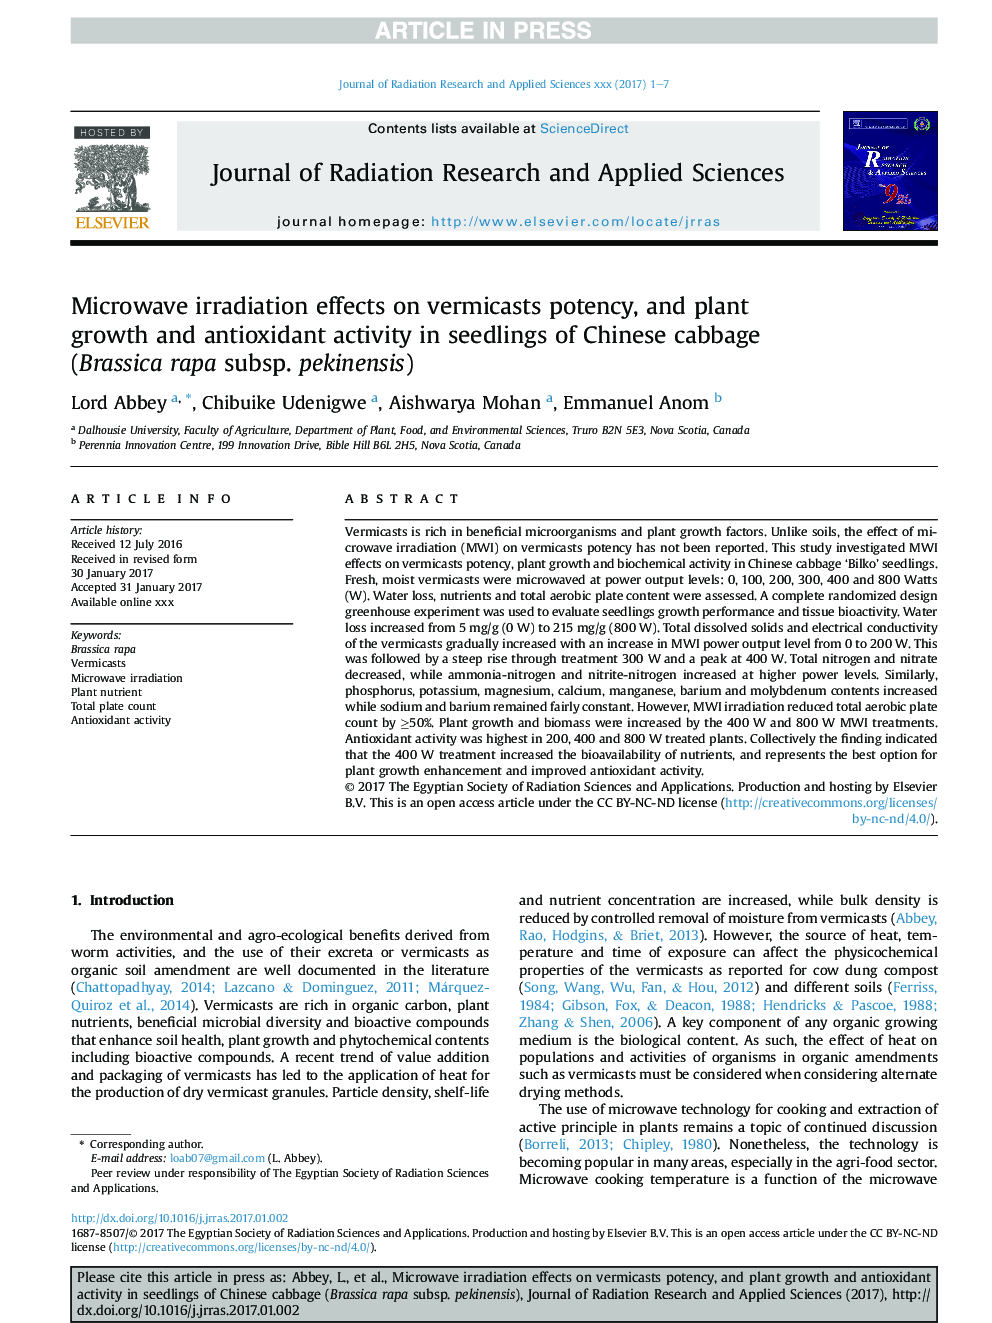 Microwave irradiation effects on vermicasts potency, and plant growth and antioxidant activity in seedlings of Chinese cabbage (Brassica rapa subsp. pekinensis)